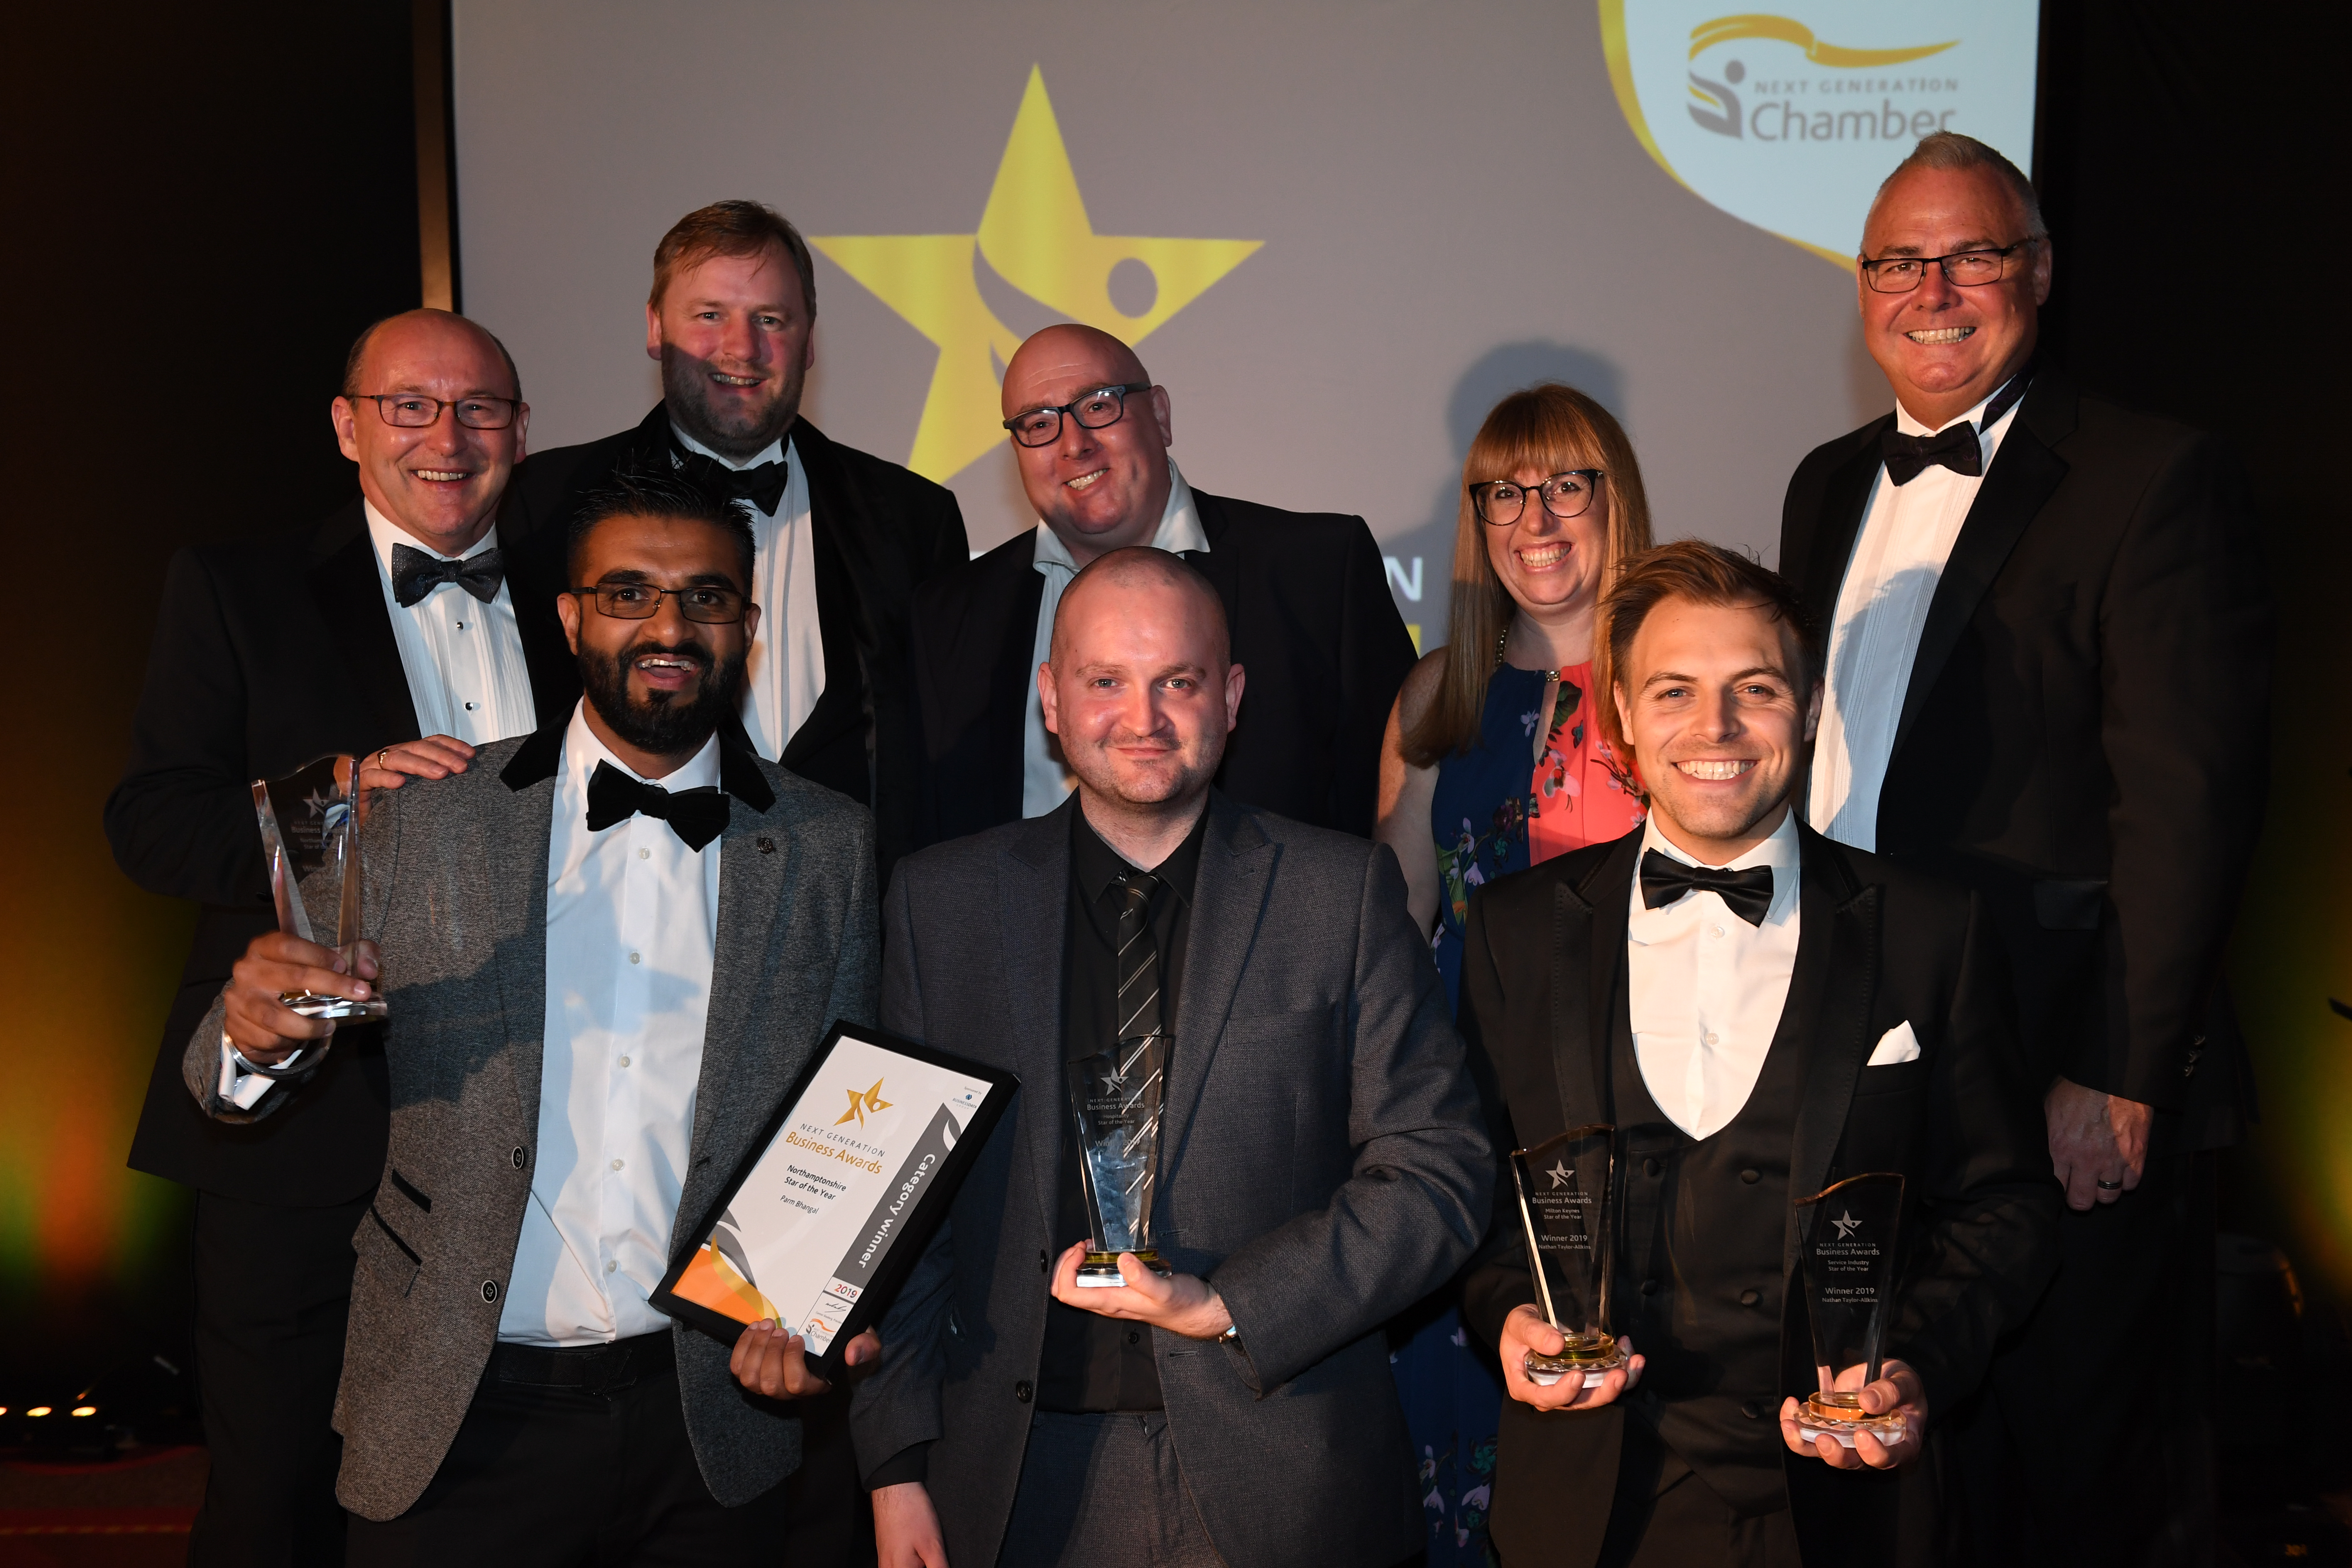 Entries for Next Generation Business Awards open soon